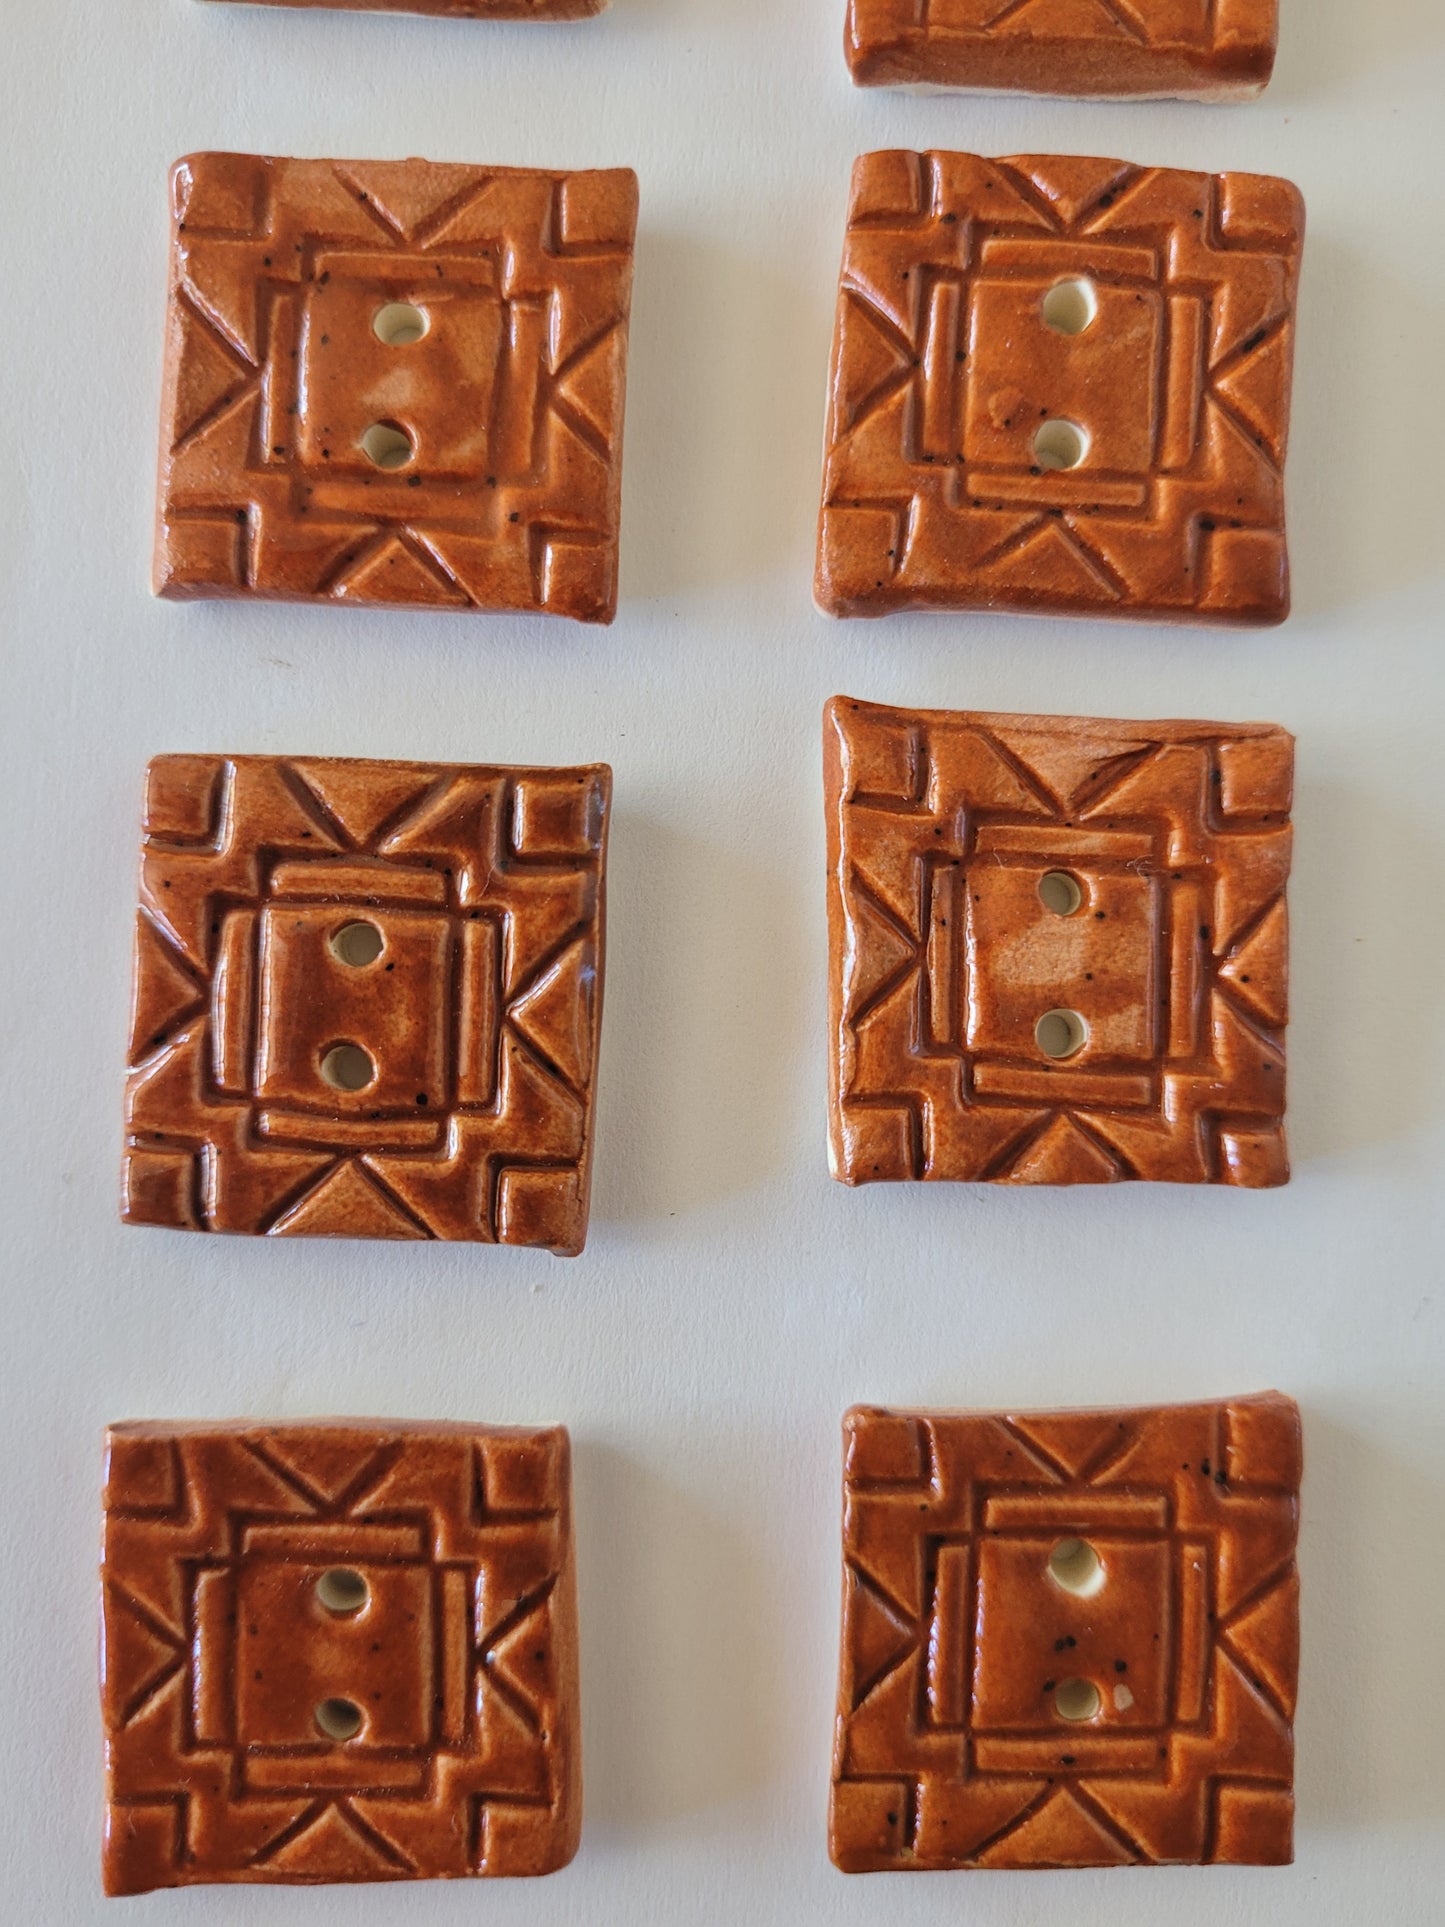 Set of 10 Square Aztec Inspired Buttons